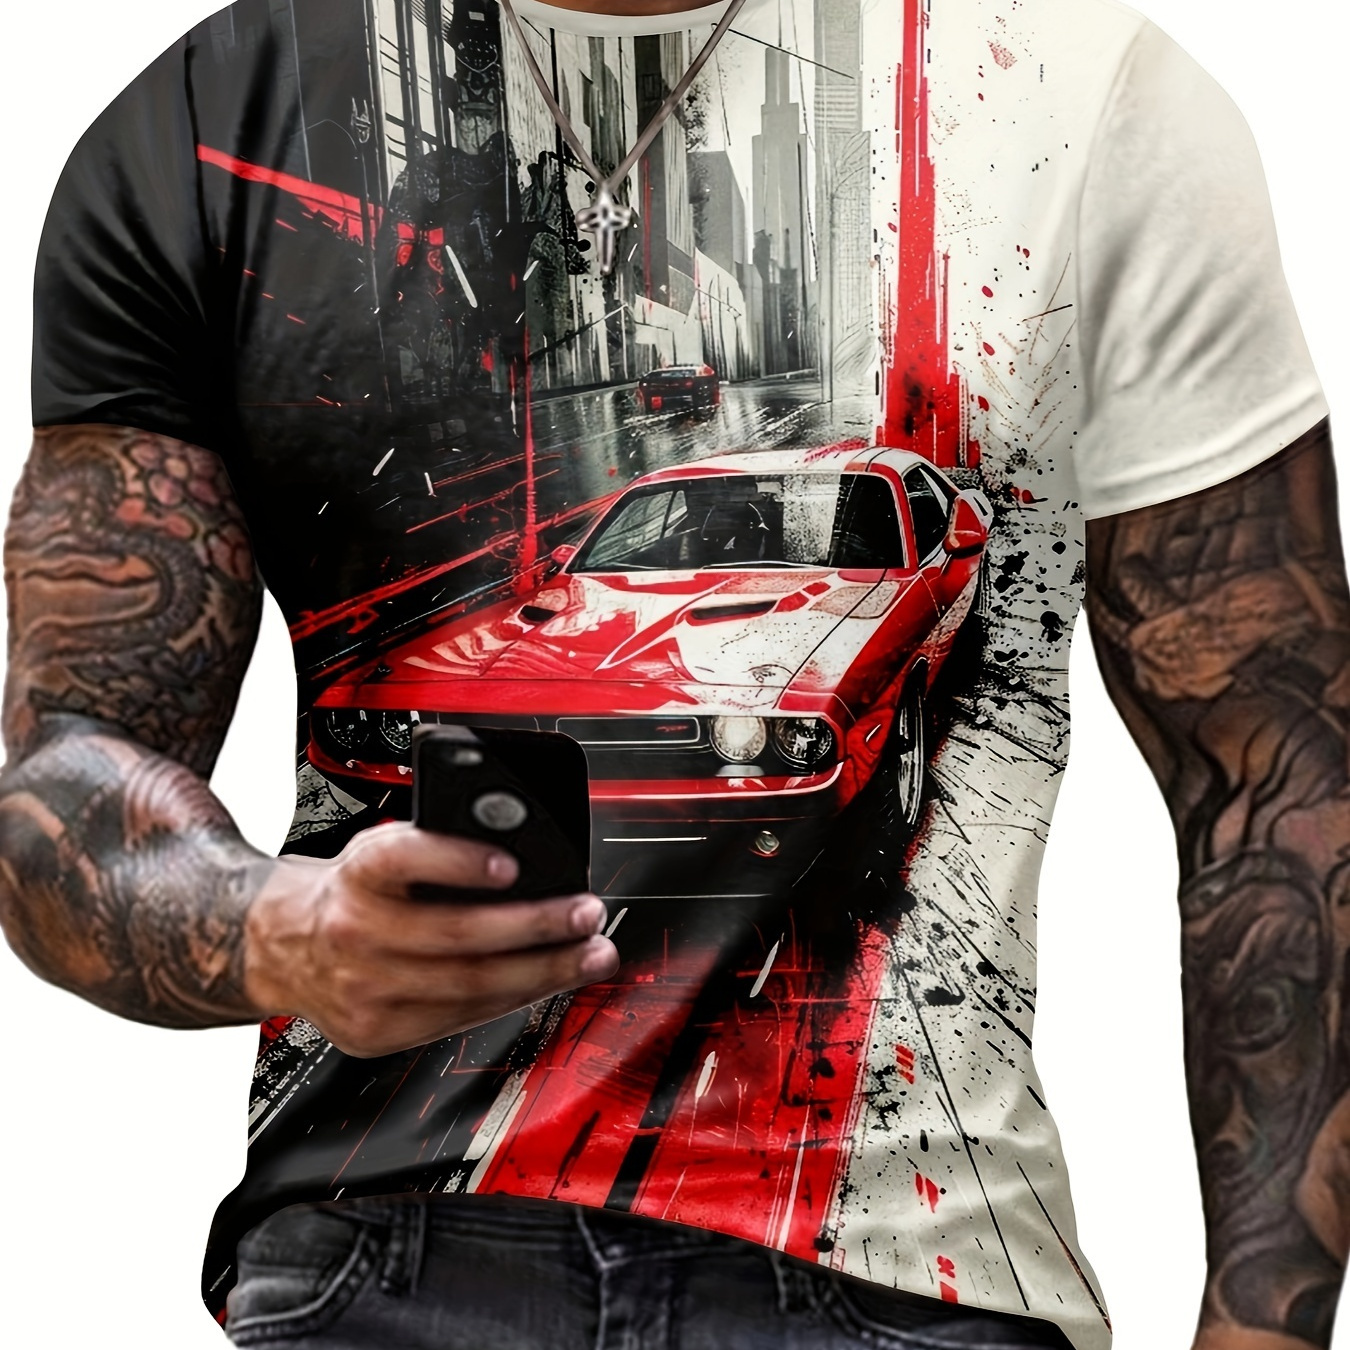 

Men's 3d Digital Classic Car And Street View Pattern And Paint Mark Print Crew Neck And Short Sleeve T-shirt For Summer Leisurewear, Chic And Stylish Sports Tops For Men